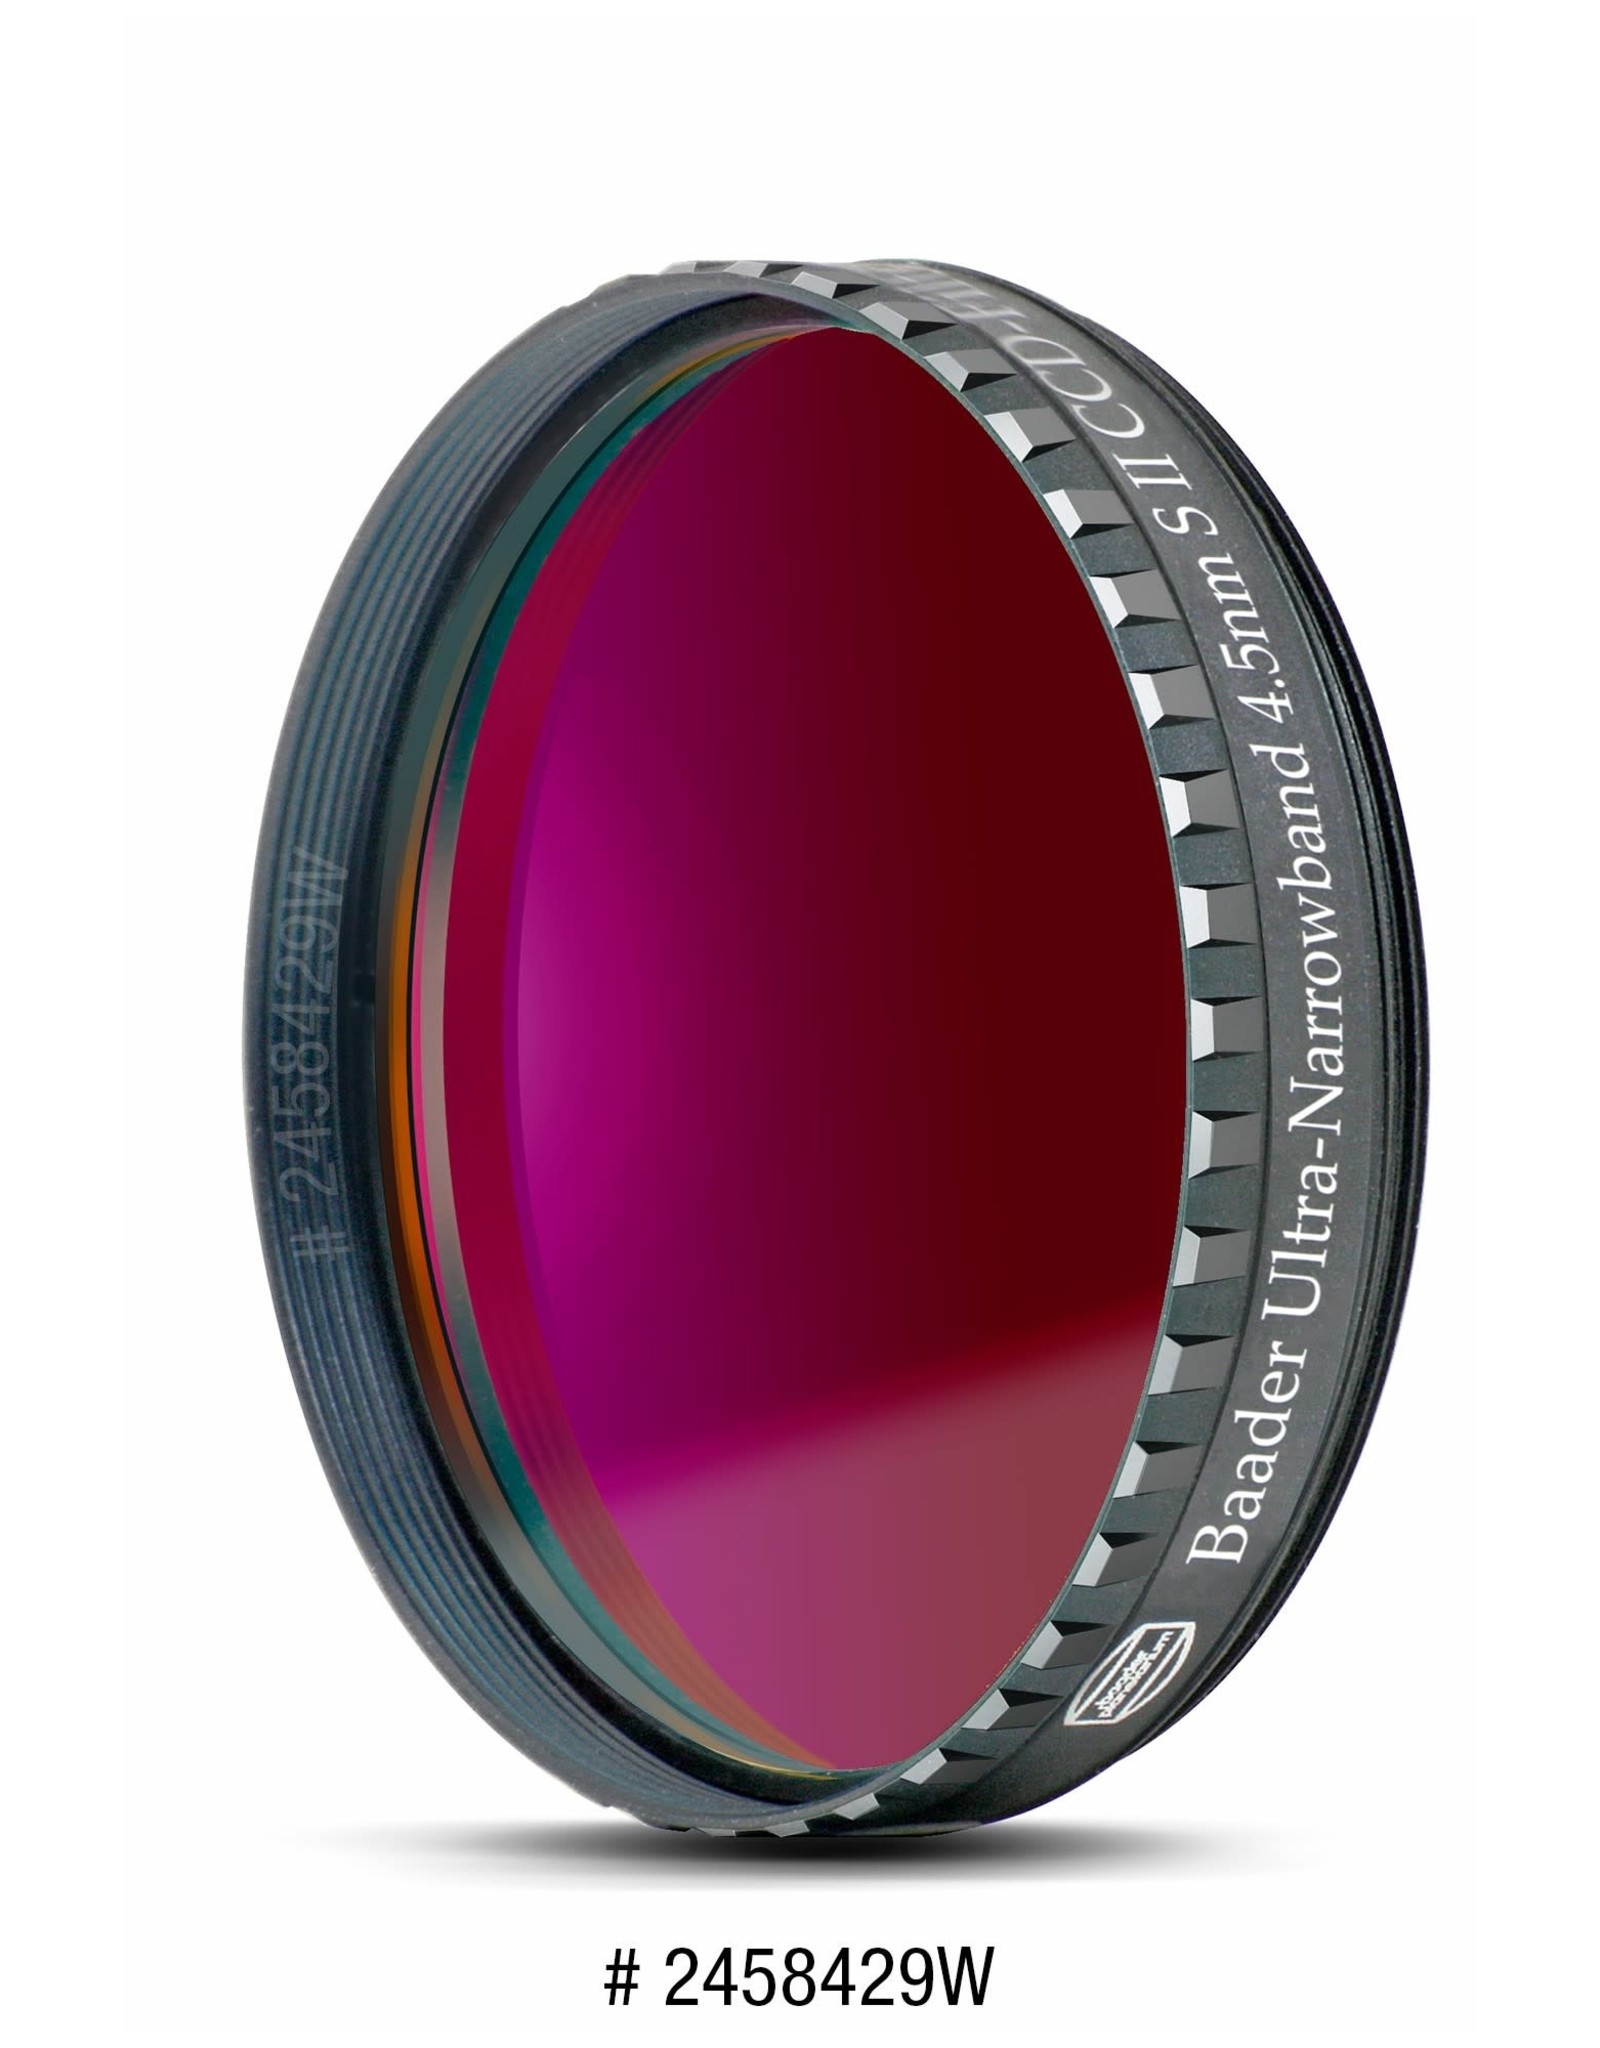 Baader Planetarium Baader Ultra Narrowband S-II CCD-Filter (4.5nm) (Specify Size)